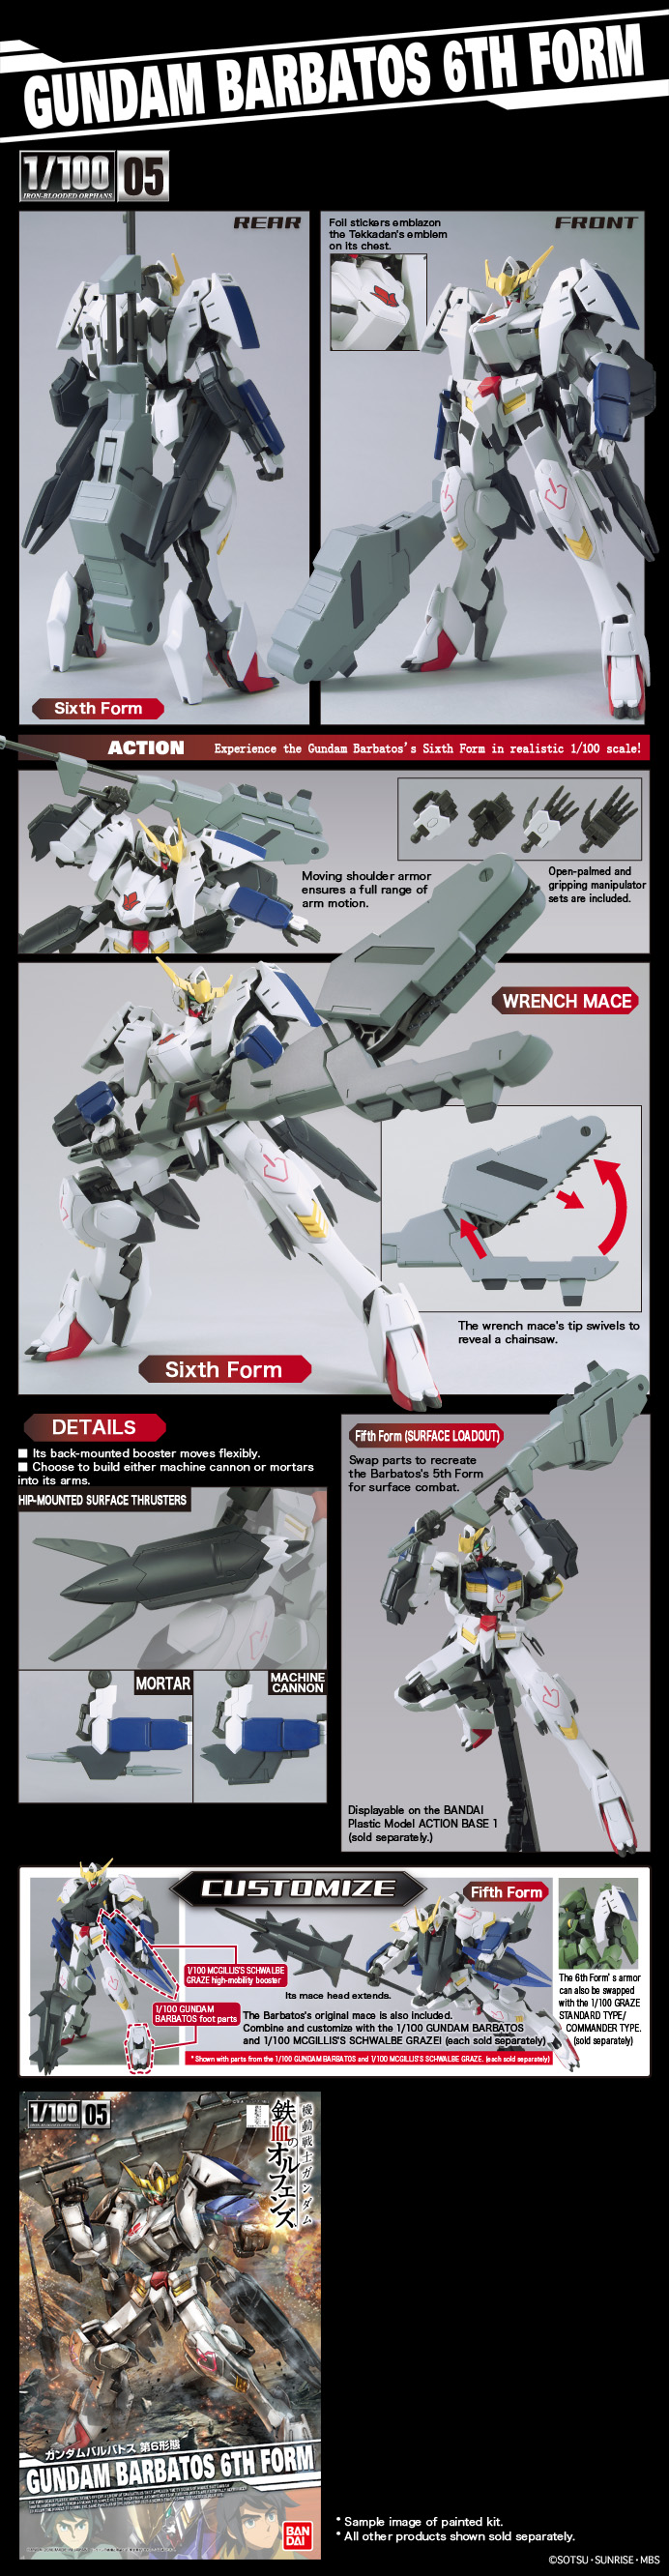 Bandai Iron-blooded Orphans 073239 Gundam Barbatos 6th Form 1/100 Scale Kit for sale online 